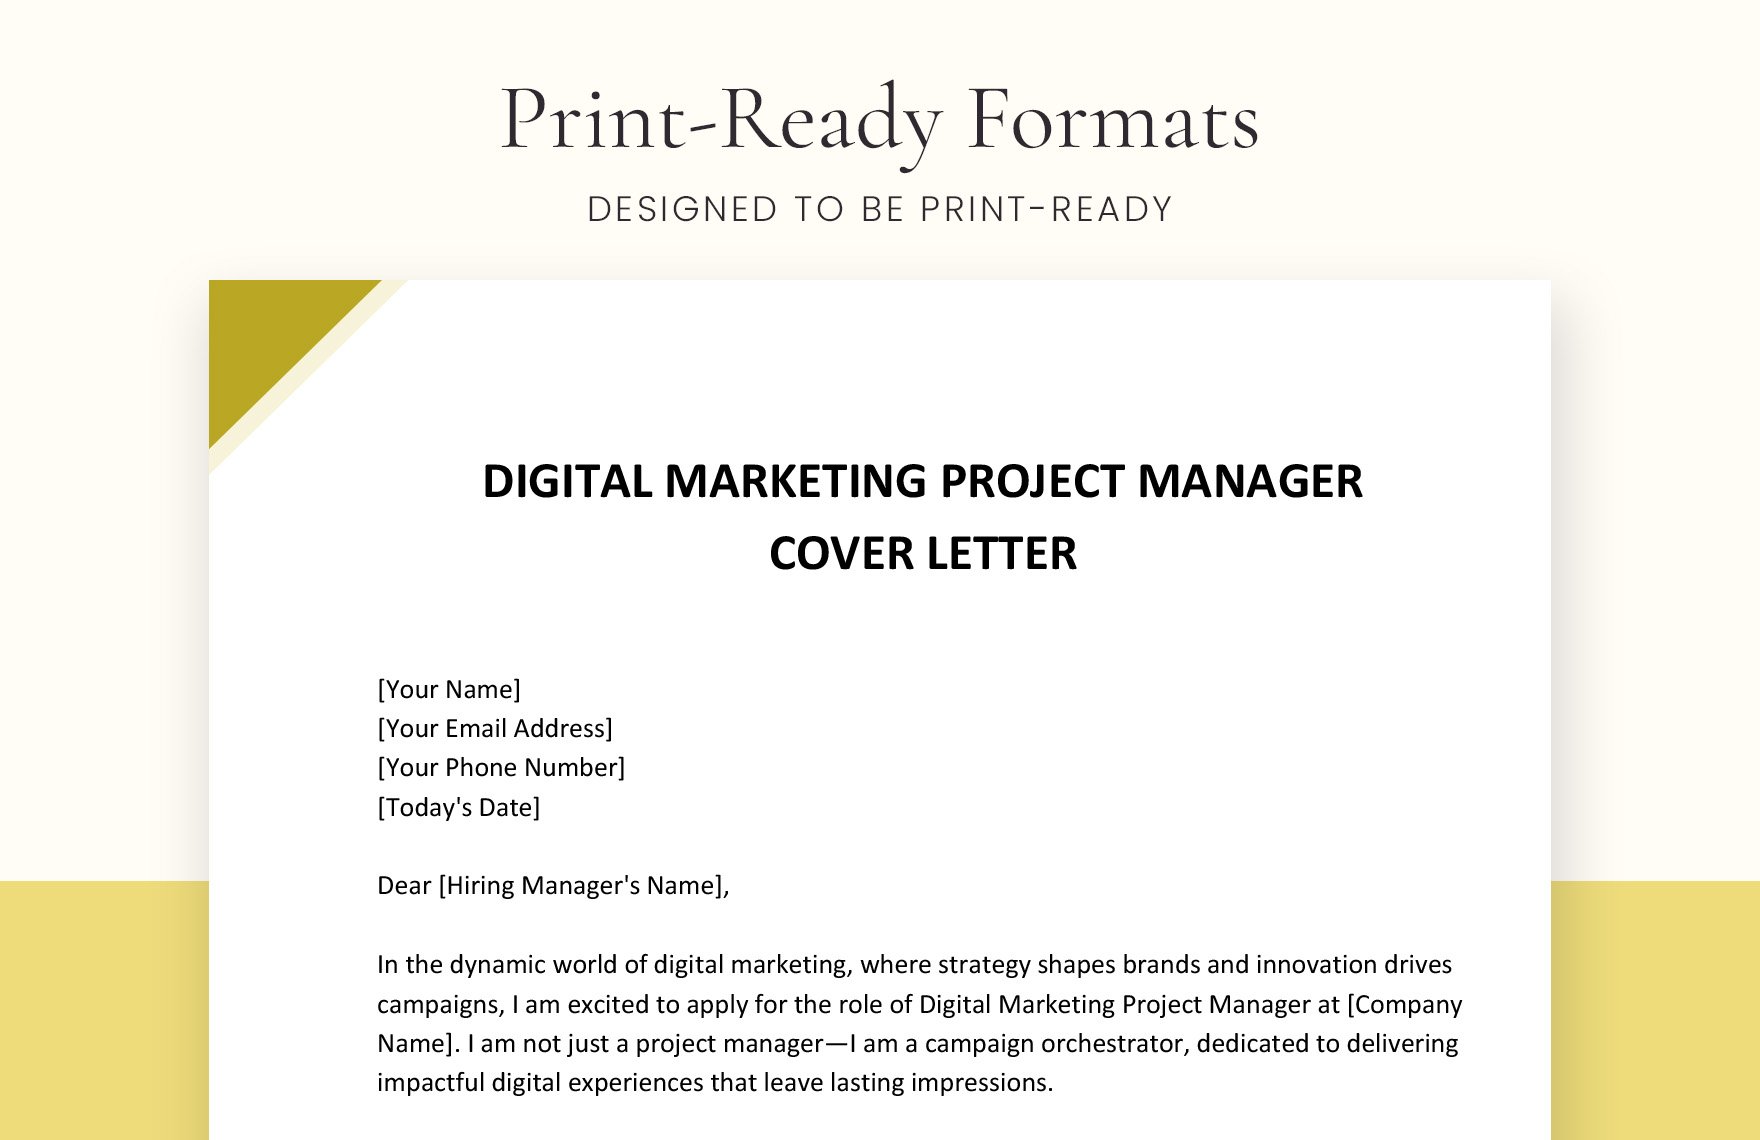 Digital Marketing Project Manager Cover Letter